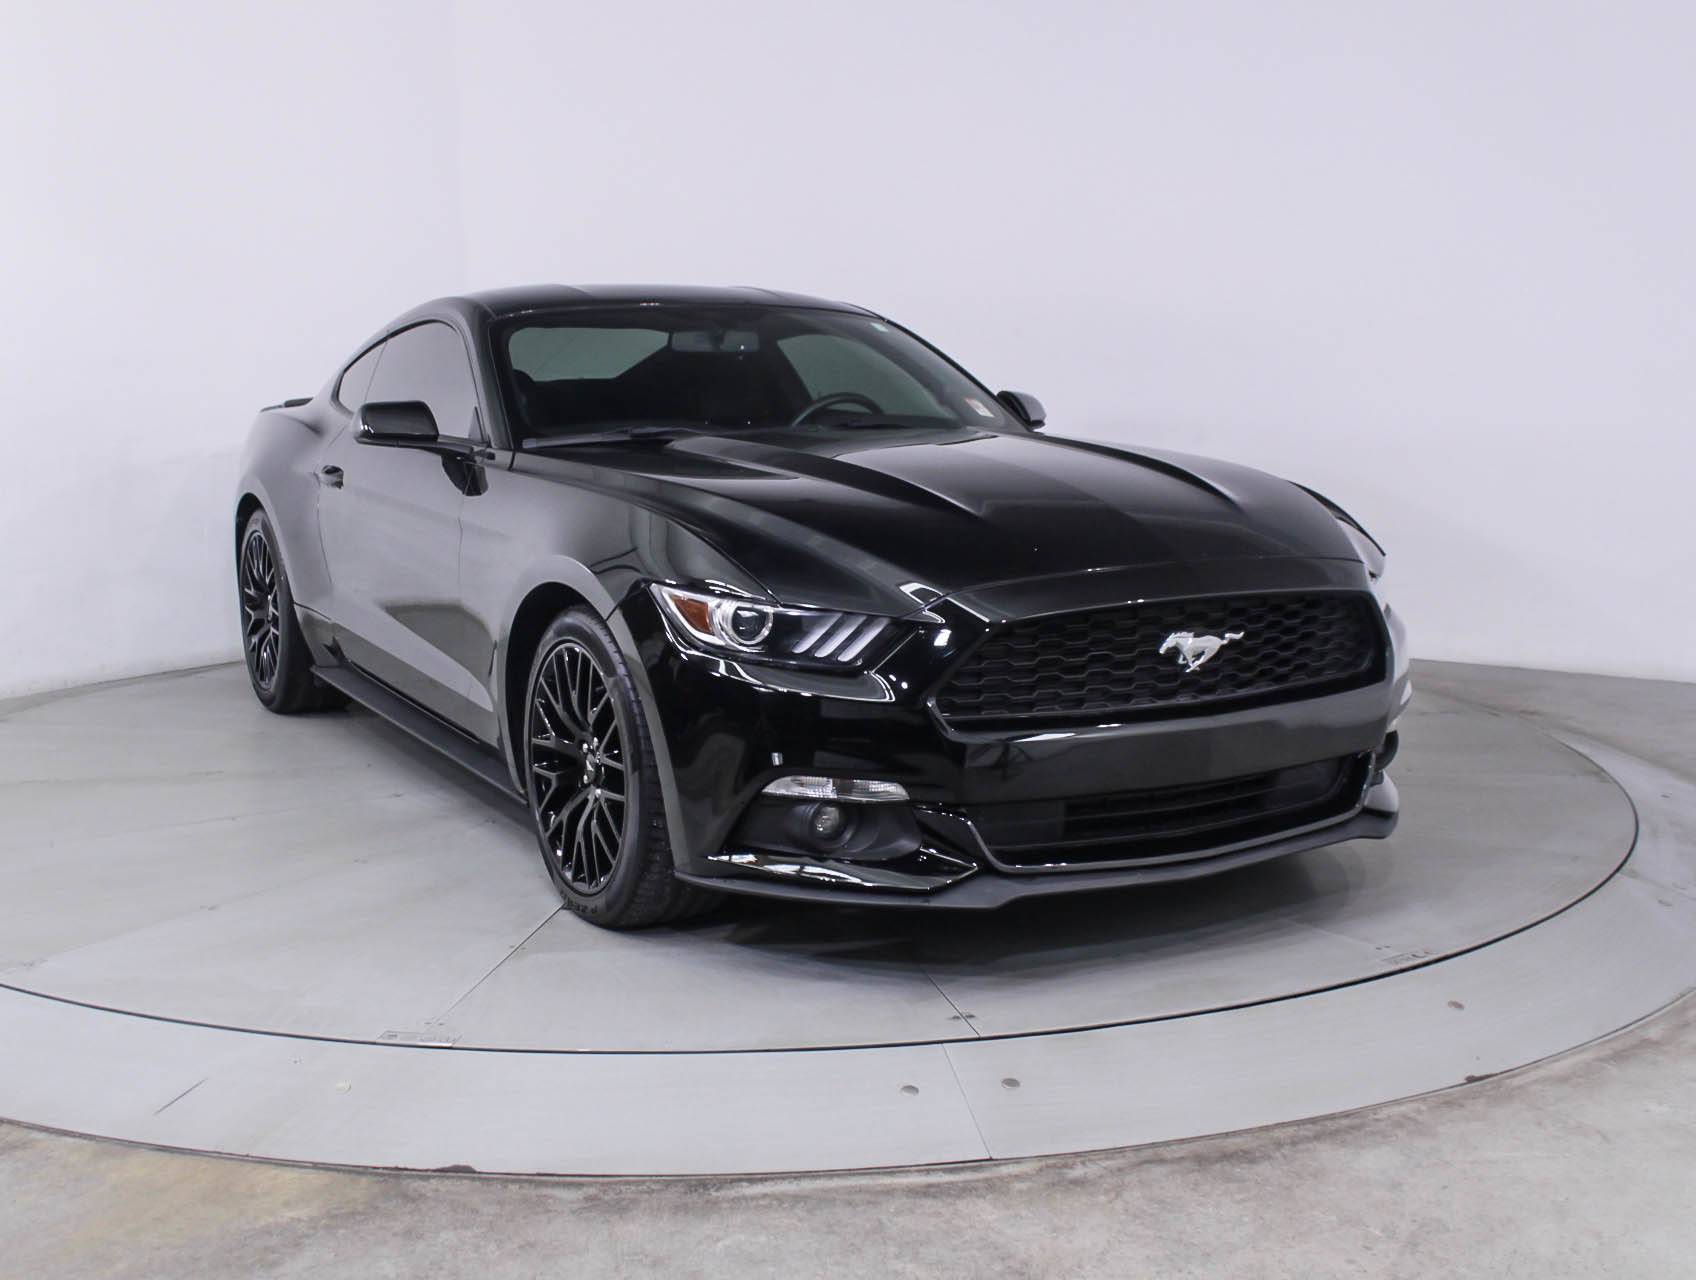 Florida Fine Cars - Used FORD MUSTANG 2015 MIAMI 